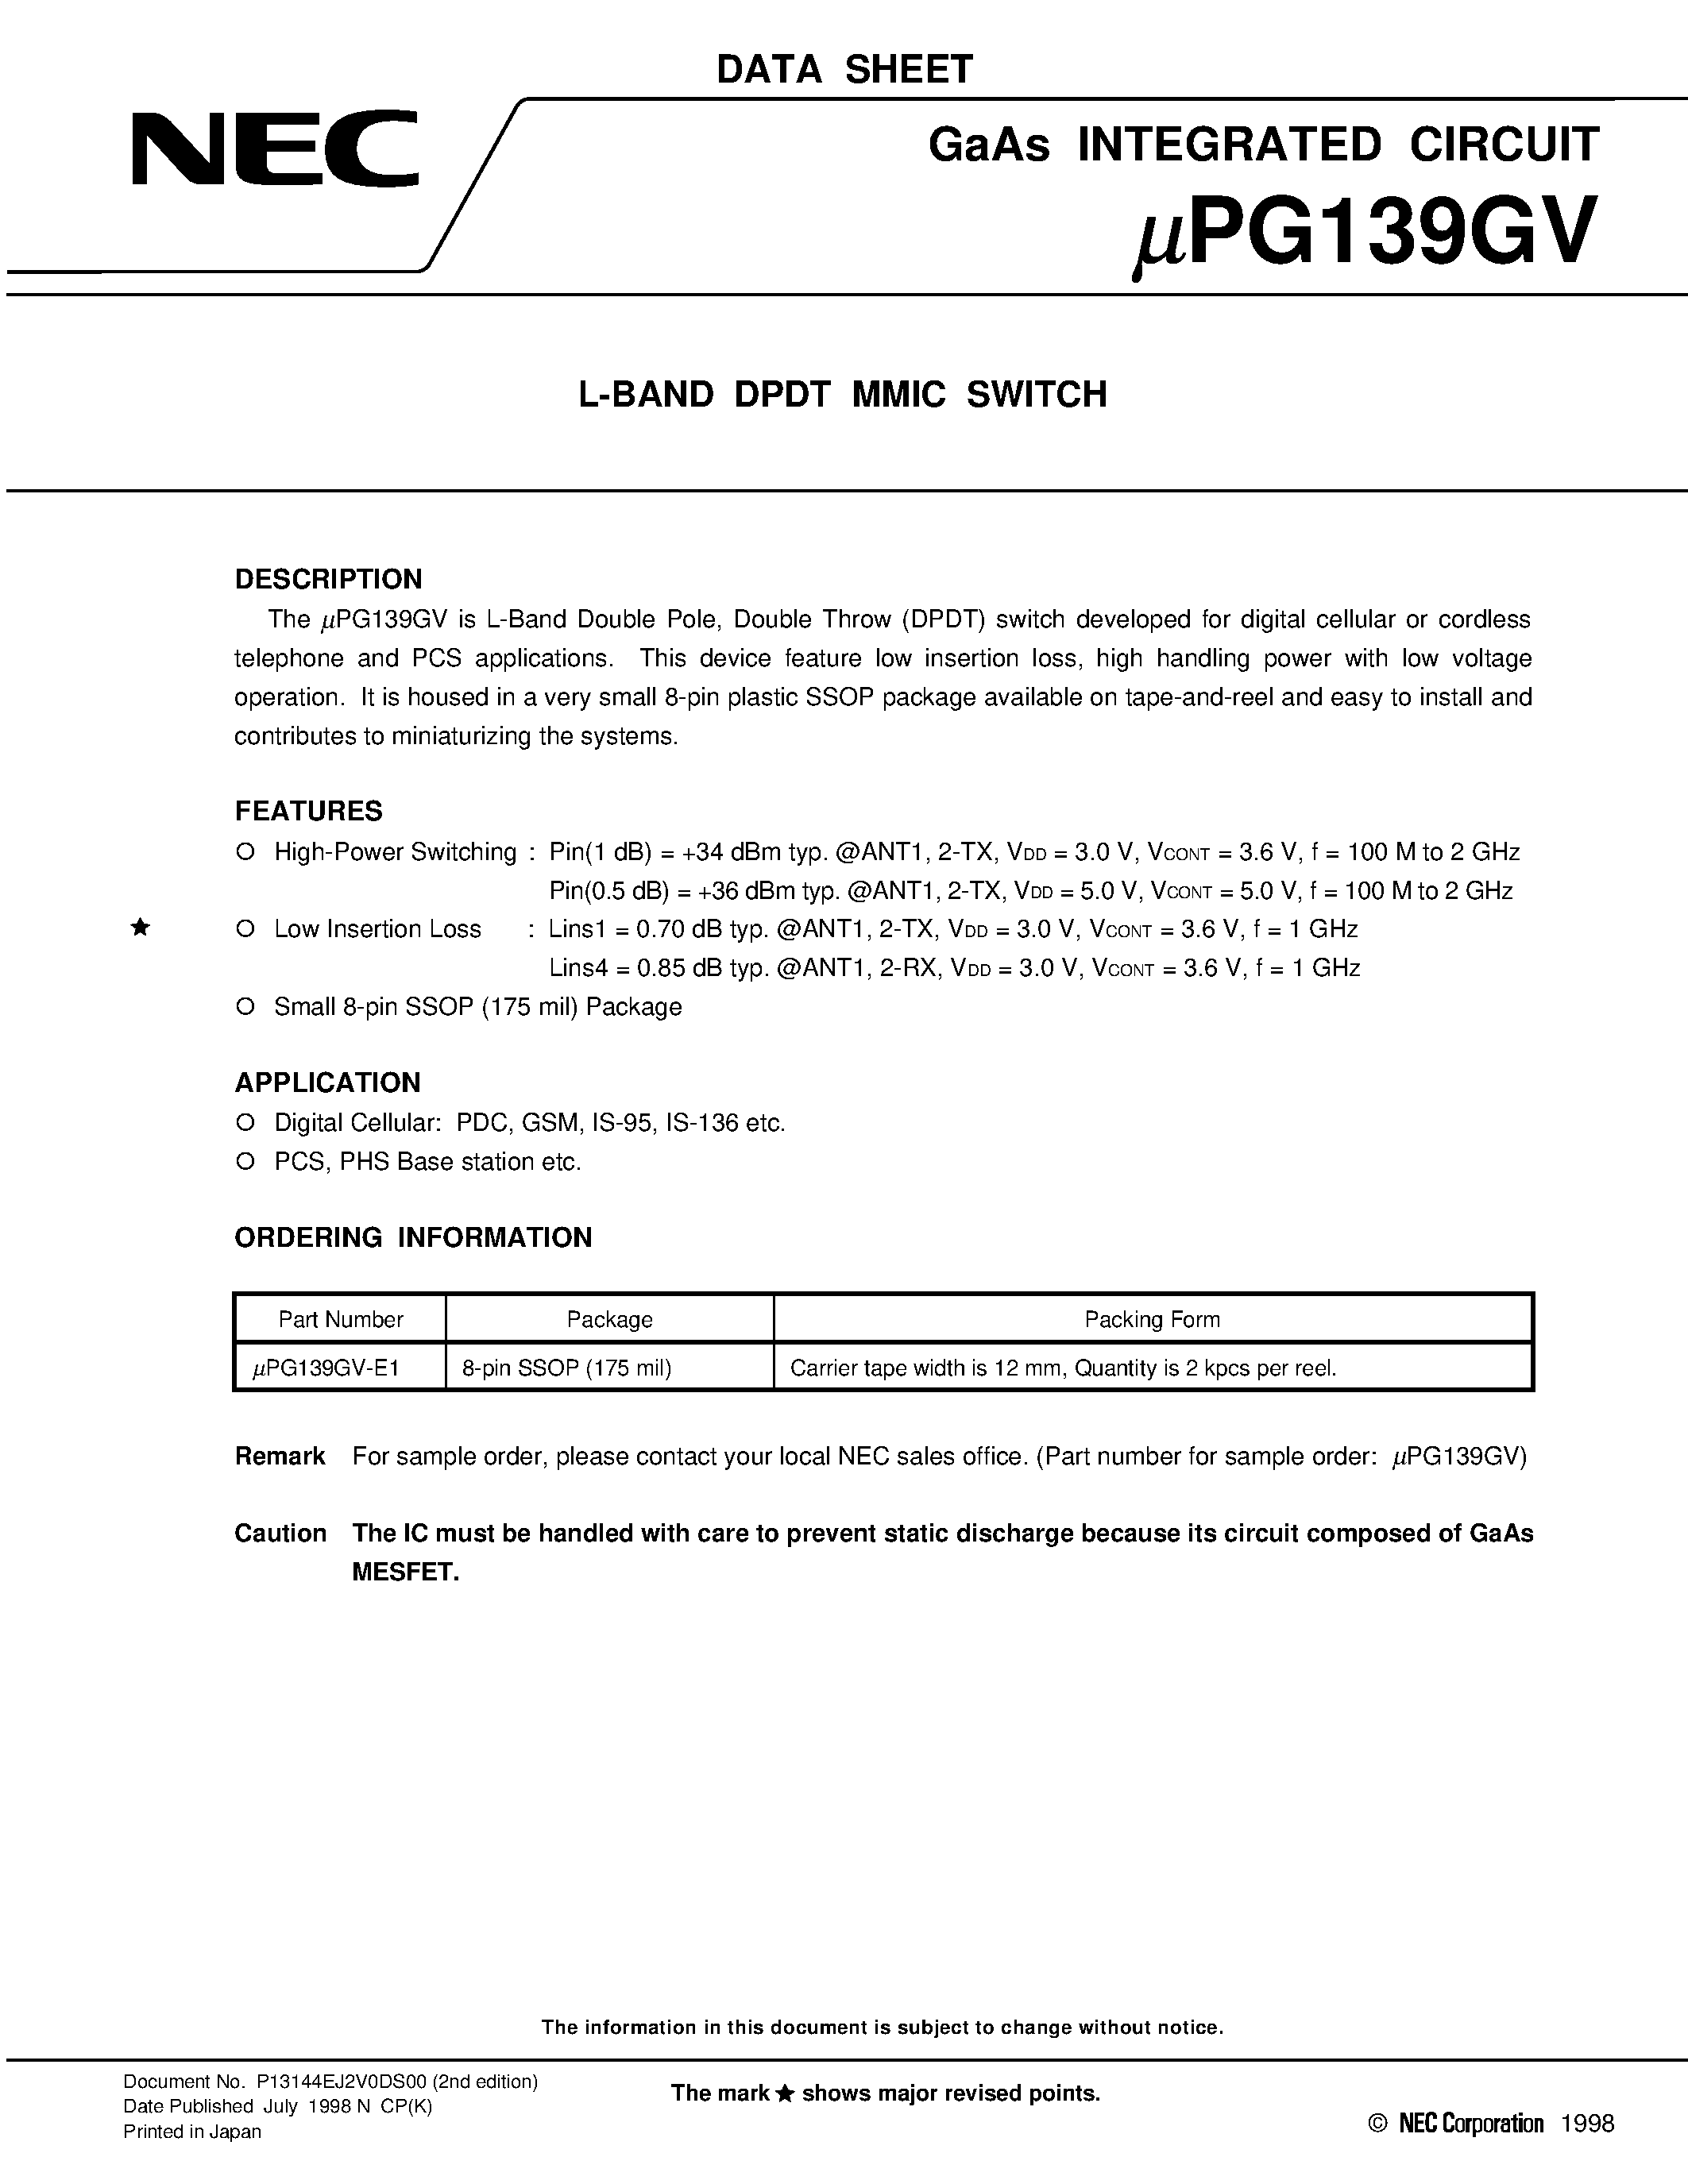 Datasheet UPG139GV - L-BAND DPDT MMIC SWITCH page 1